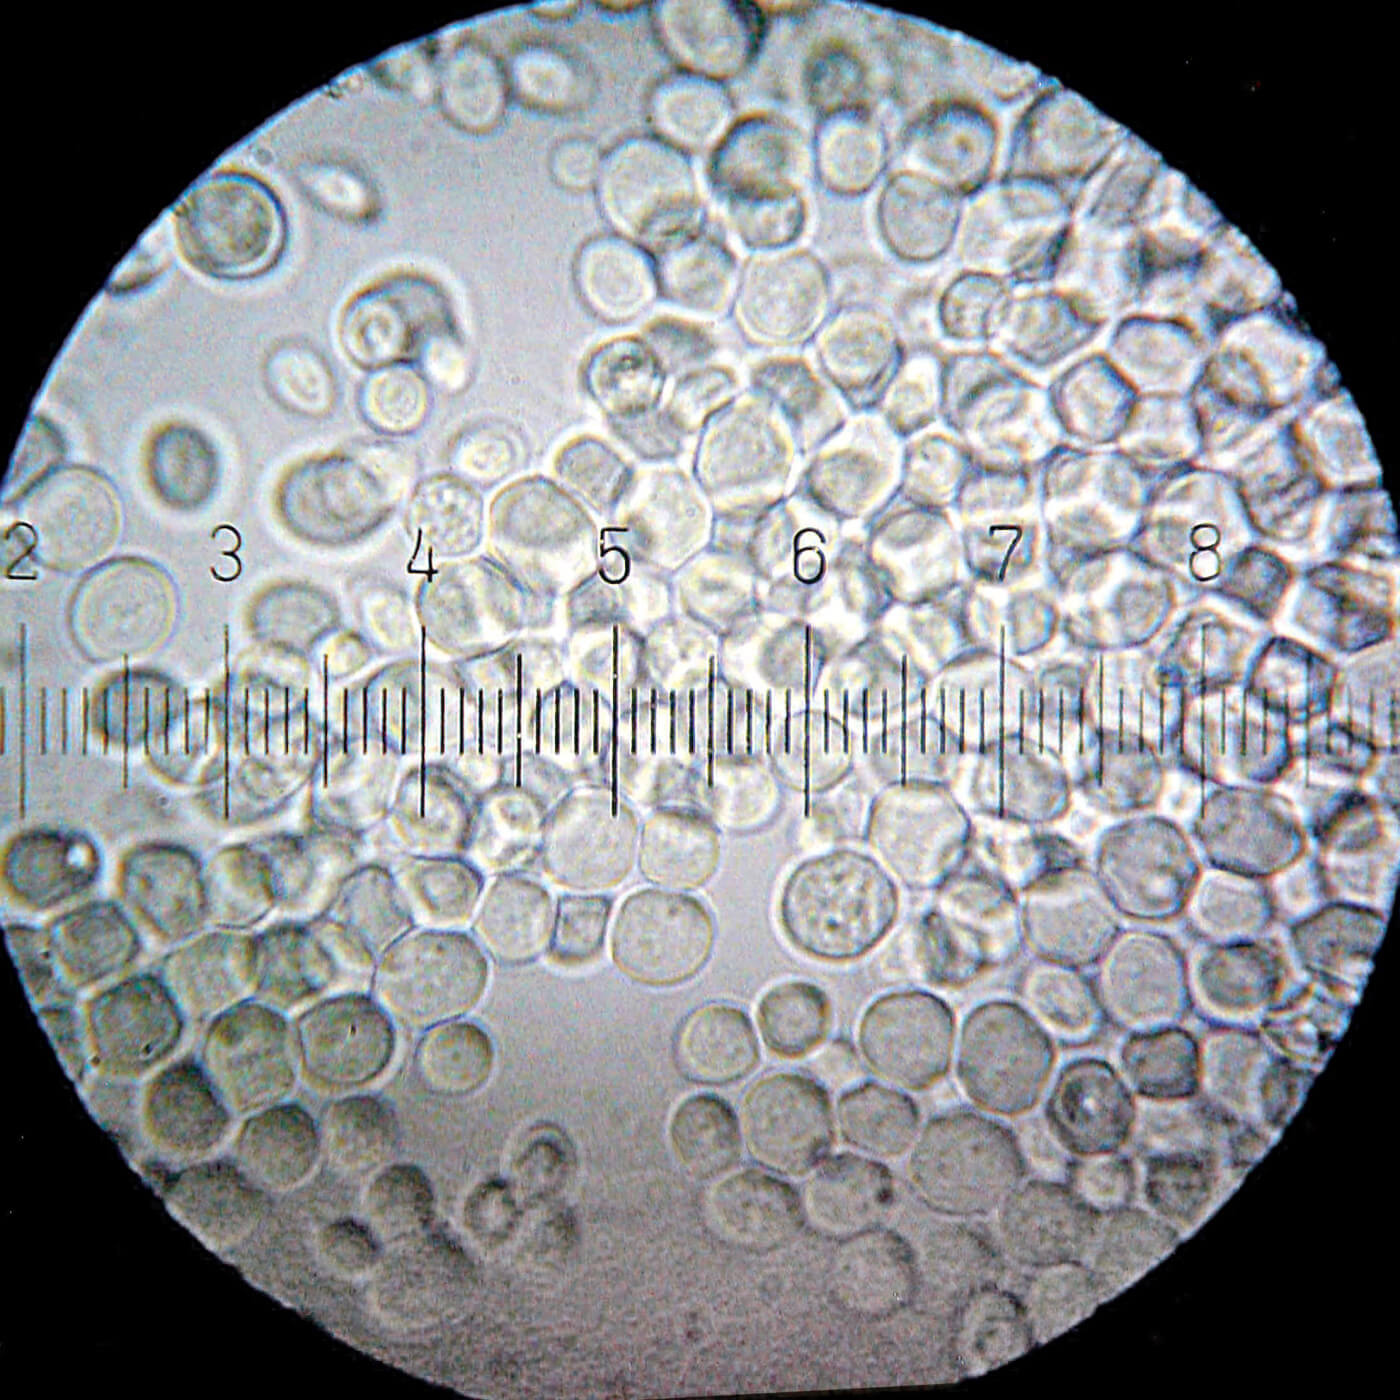 When You Rehydrate Yeast, It Looks like This